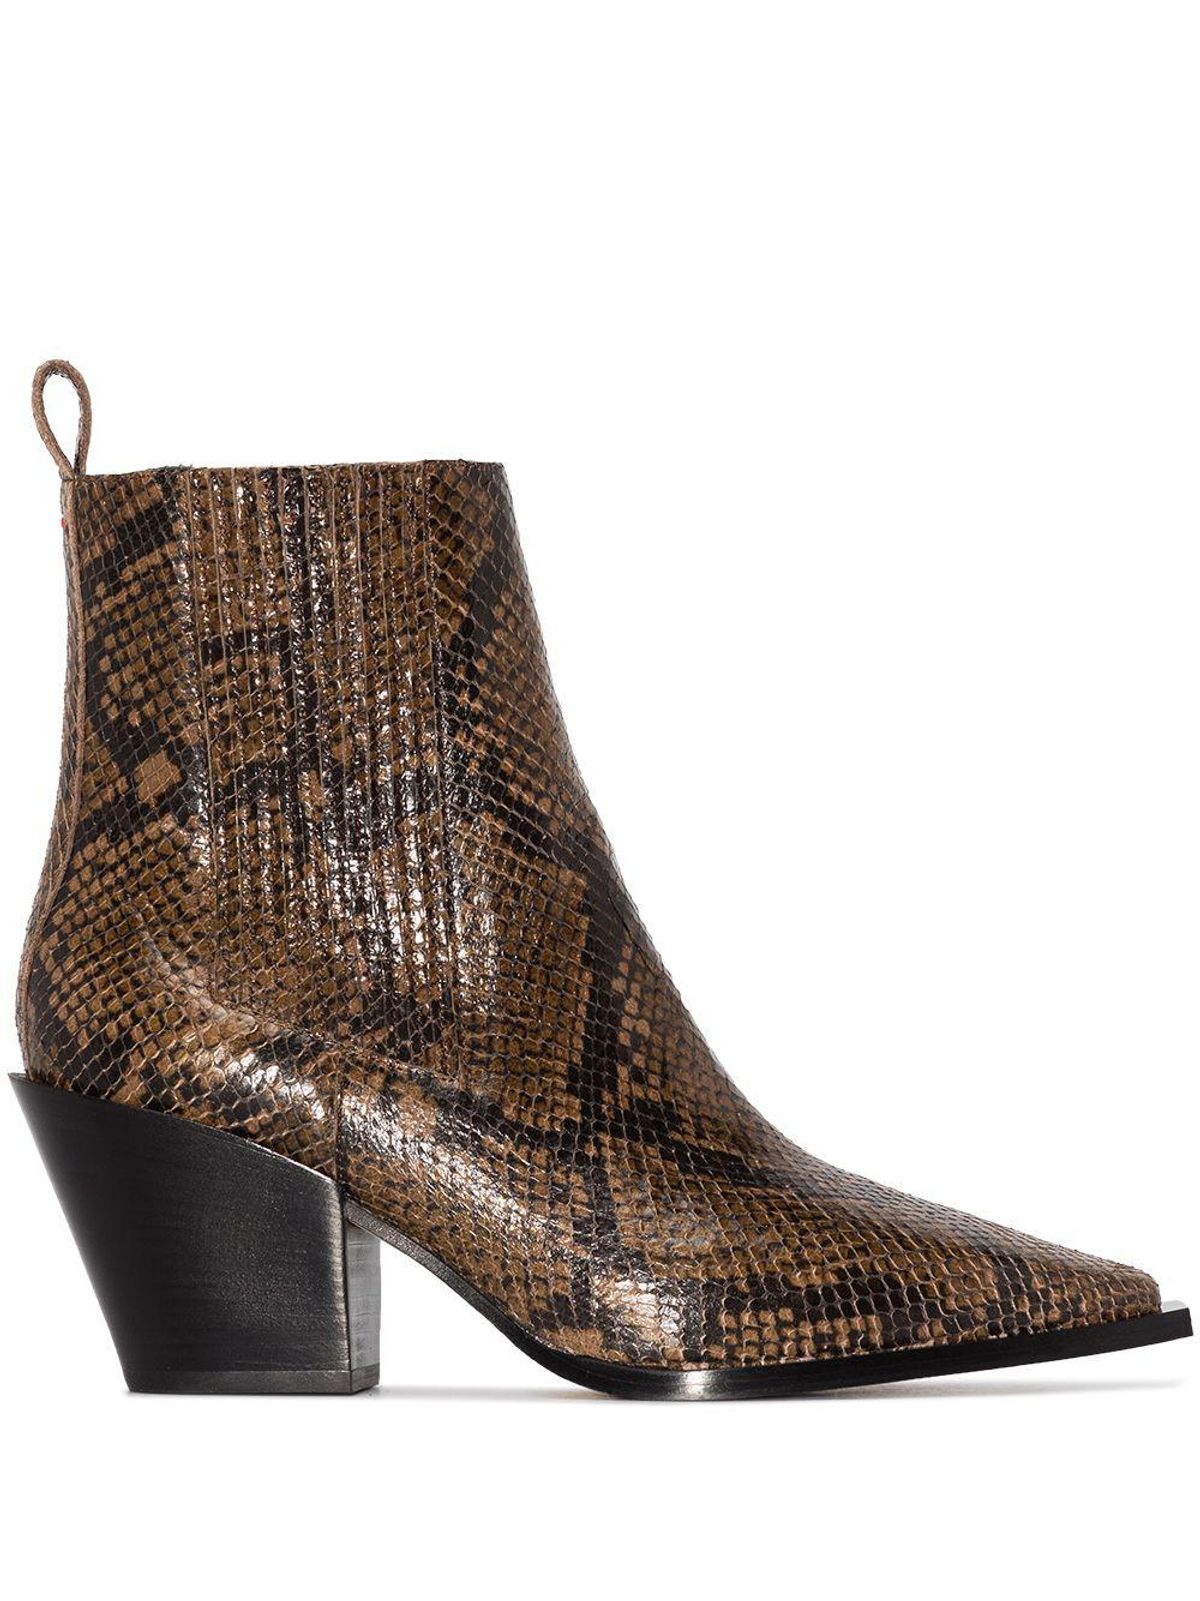 Kate 75mm Snakeskin Ankle Boots